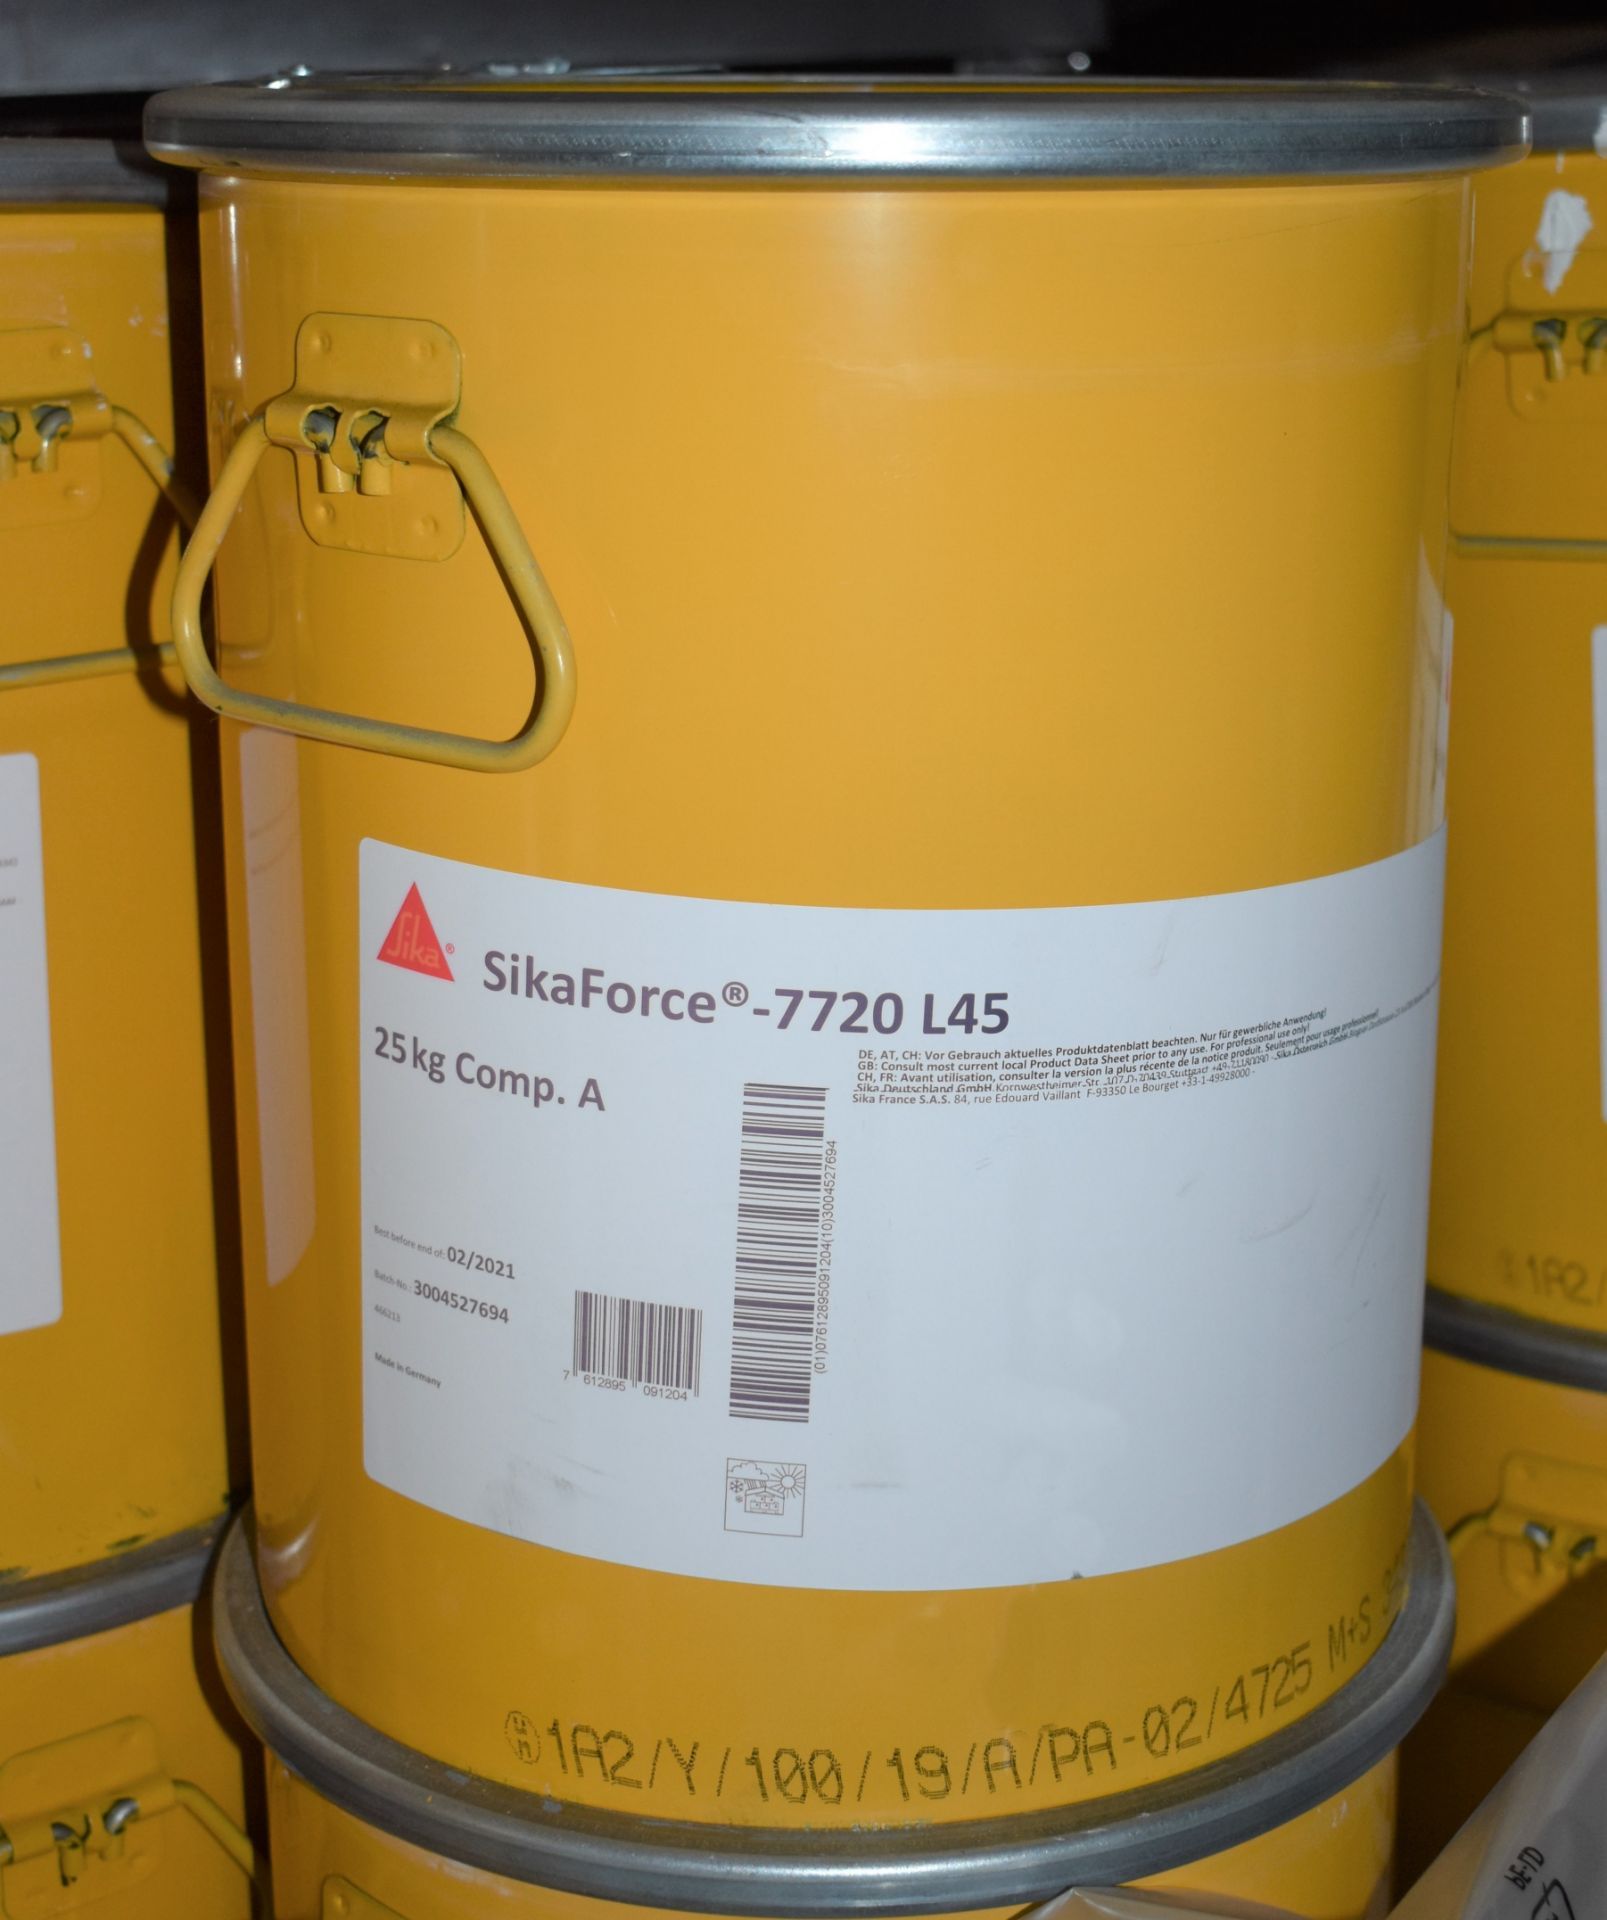 8 x SikaForce -7720 L45 None Sagging Assembly Adhesive 25kg Barrels- New Sealed Stock - CL622 -